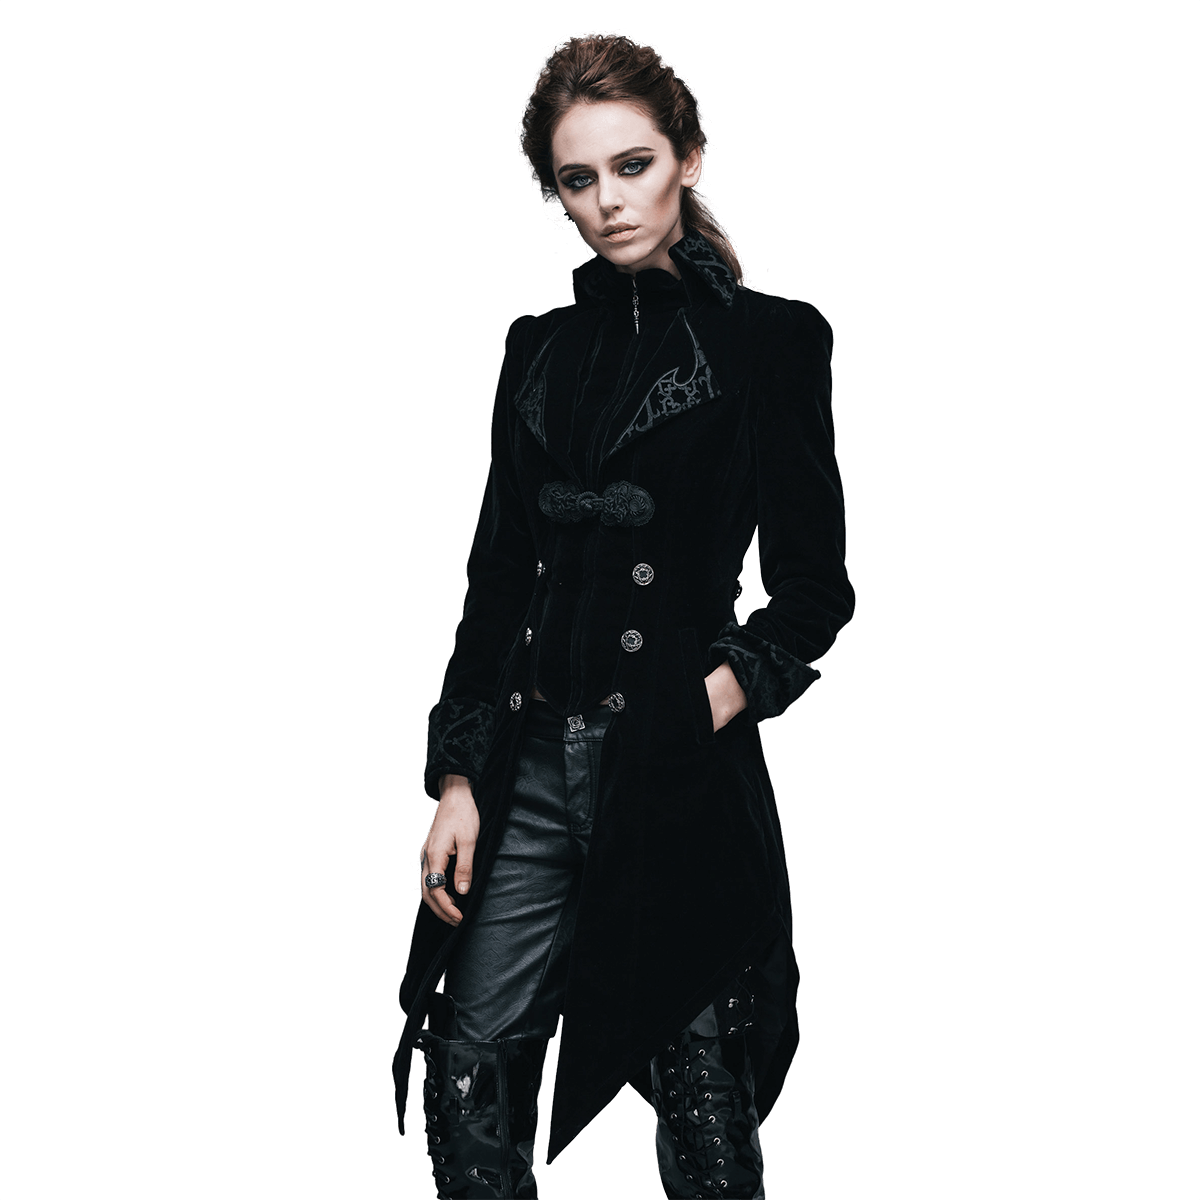 Gothic Vintage Female Black Trench Coat / Women's Steampunk Embroidery Printed Coat with Pockets - HARD'N'HEAVY